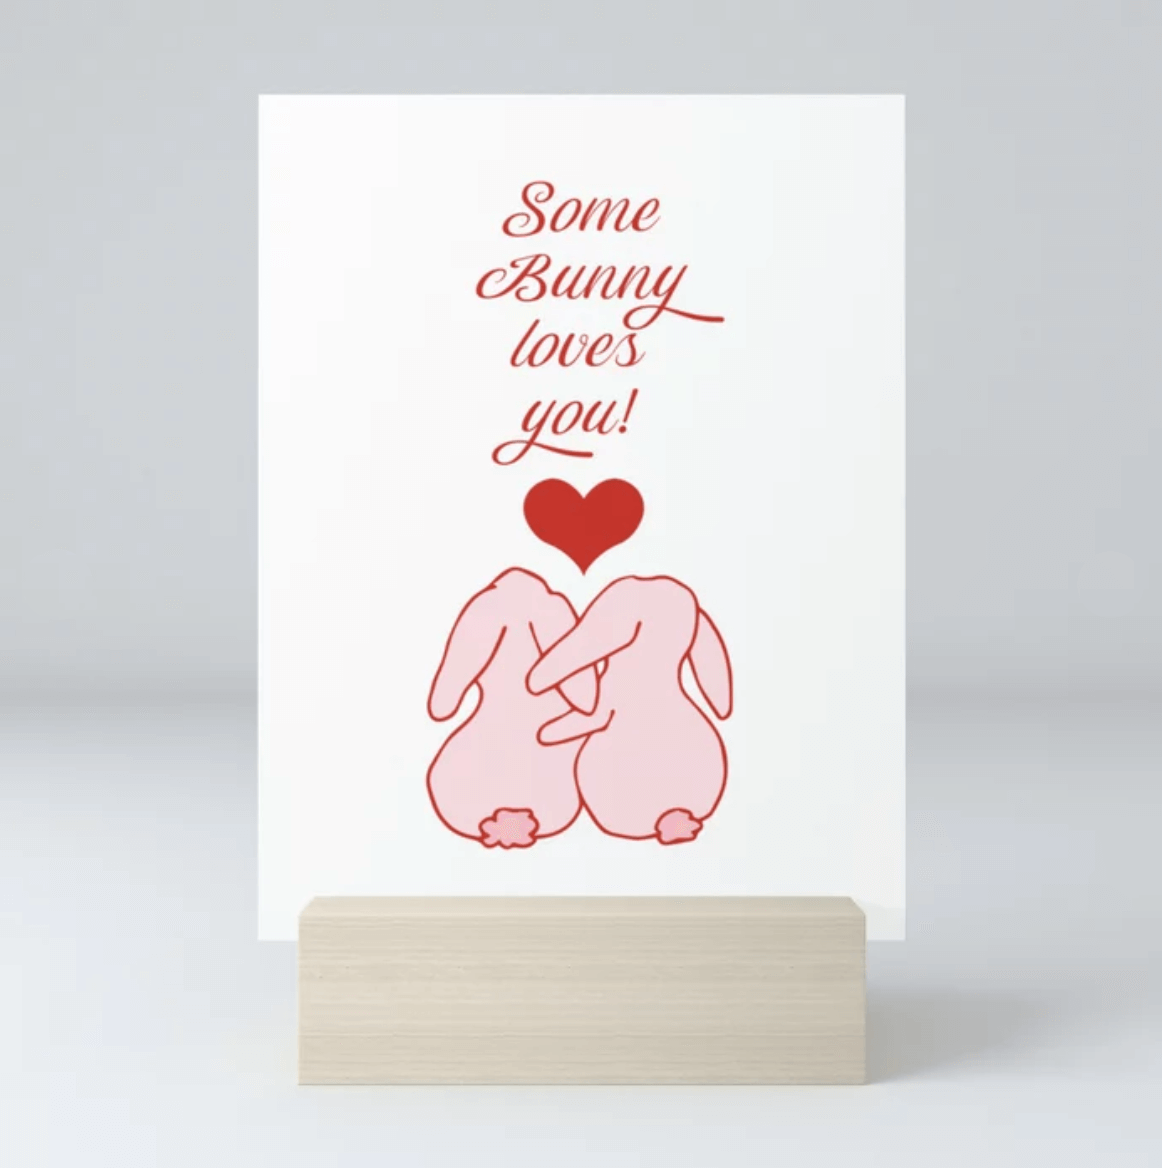 Some bunny love you – text with illustration on white background